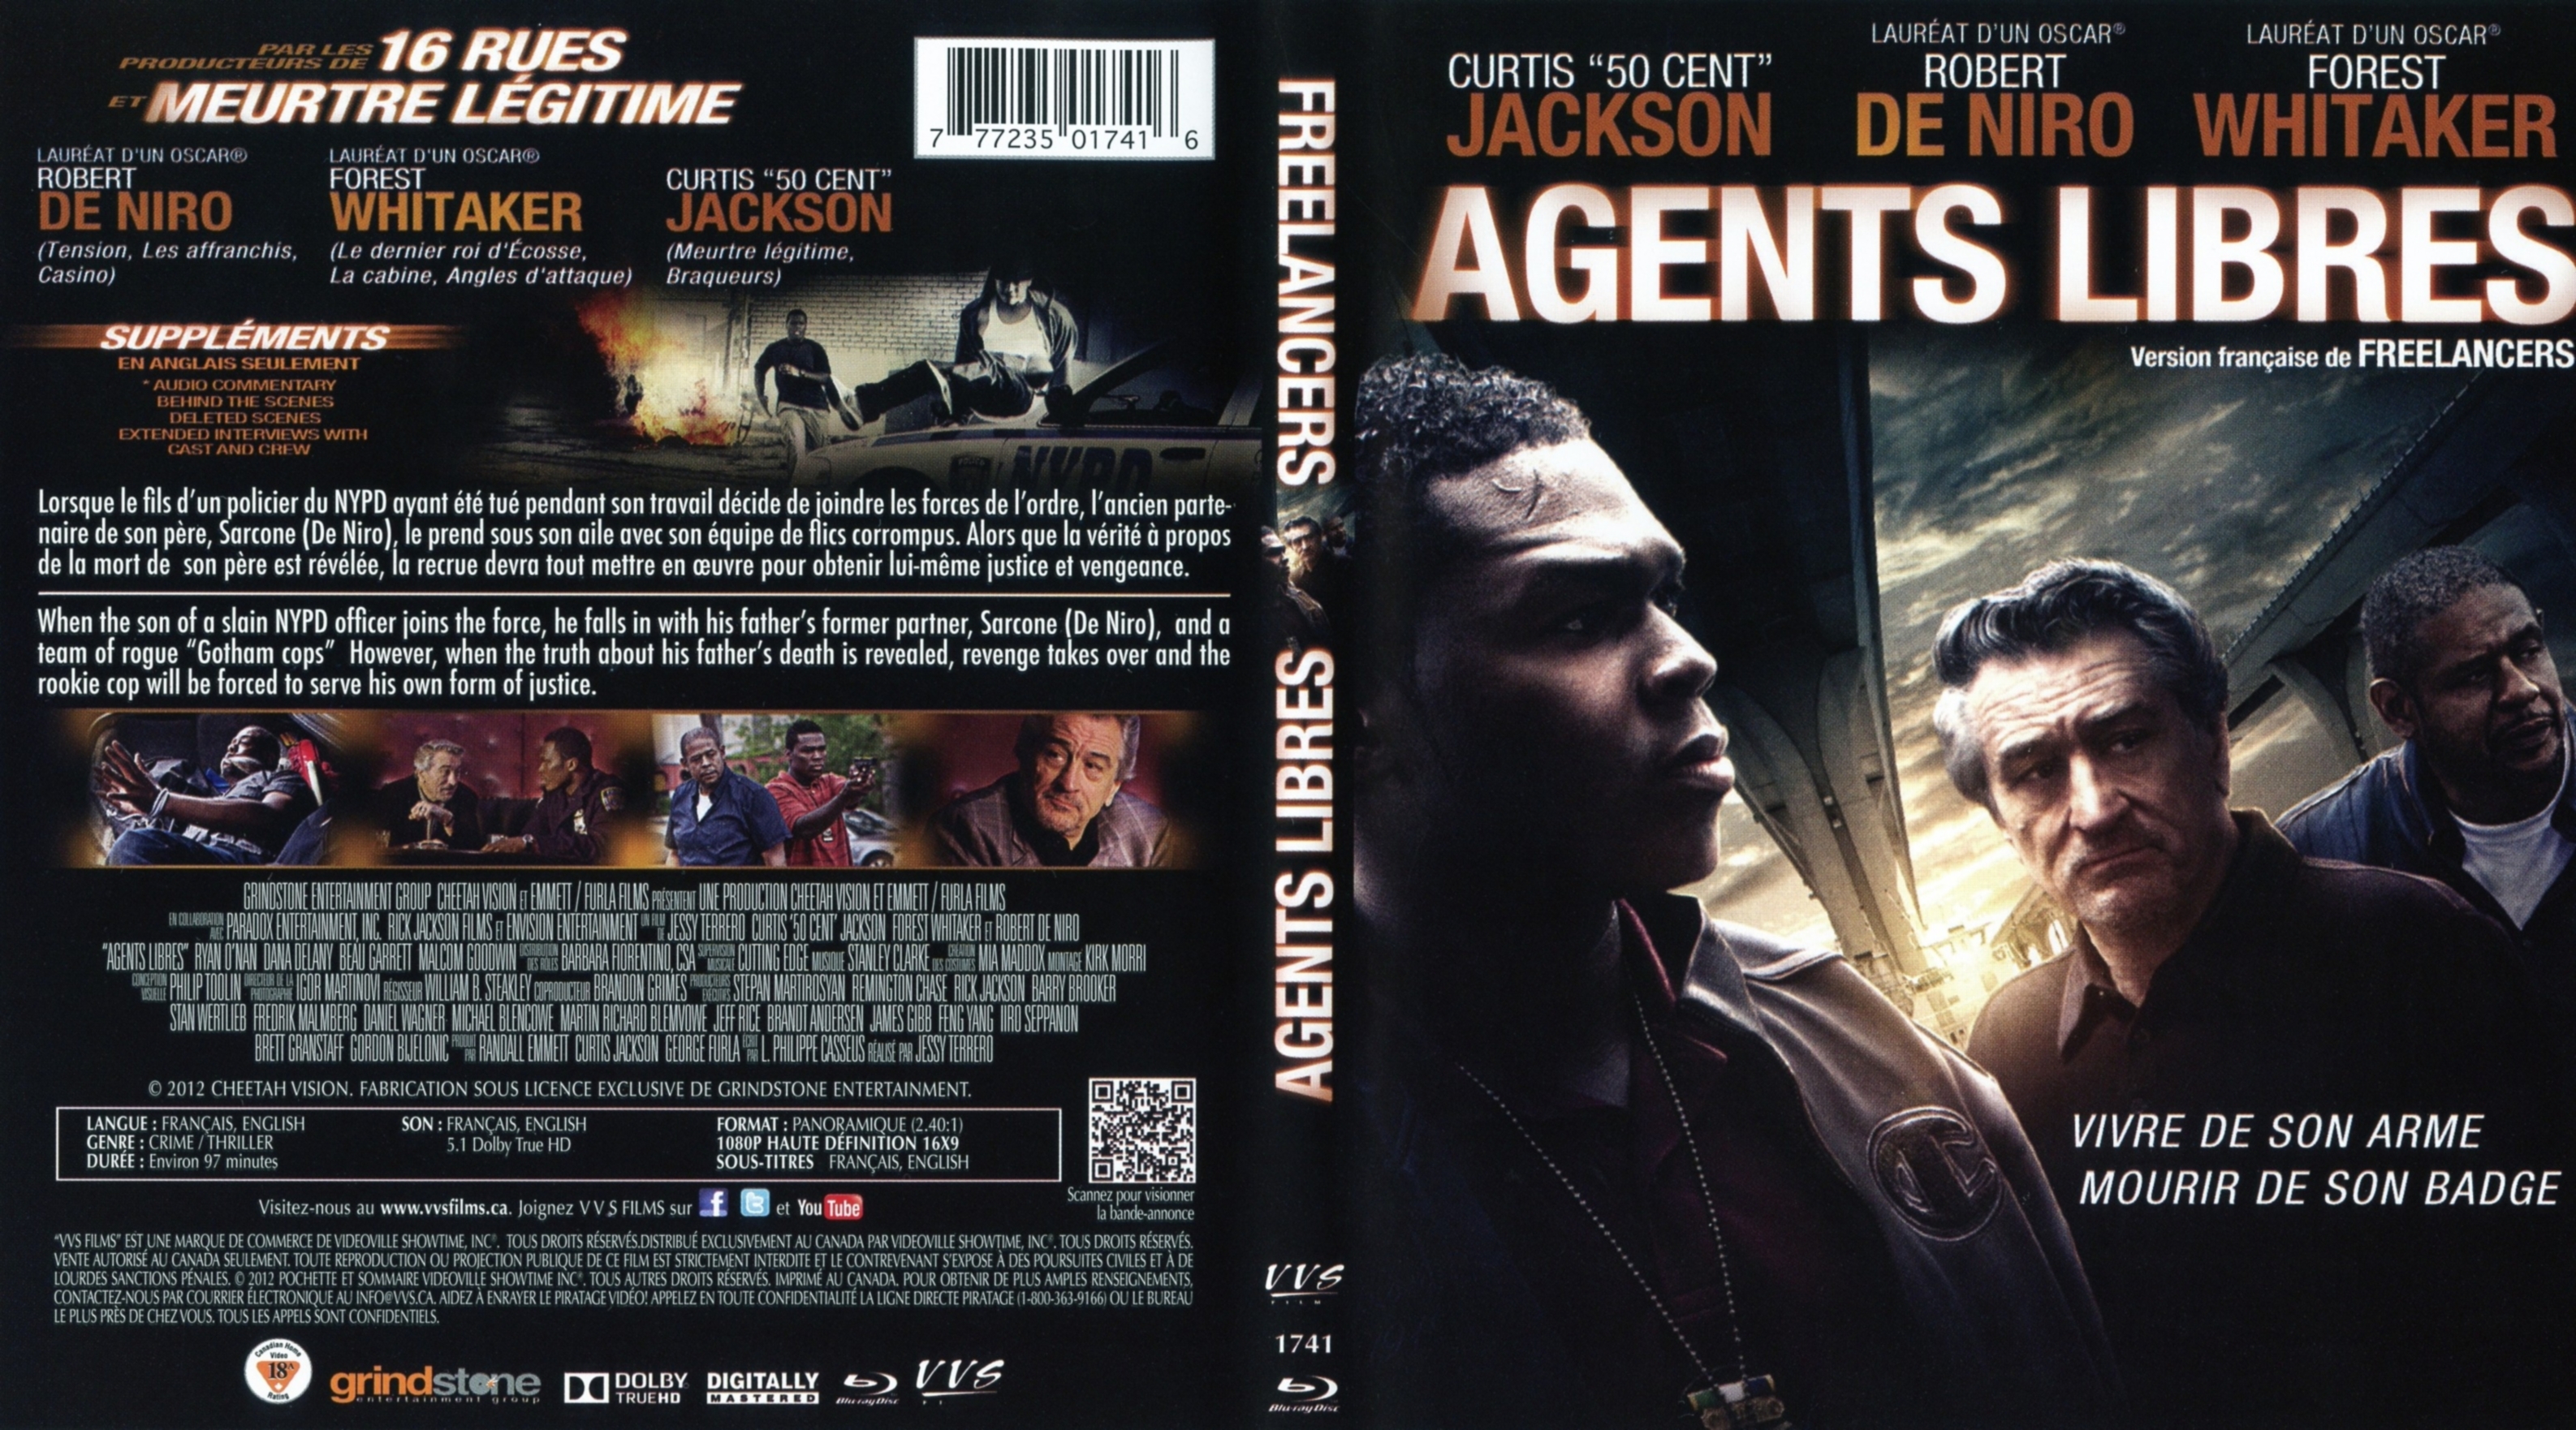 Jaquette DVD Agents Libres (Canadienne) (BLU-RAY)